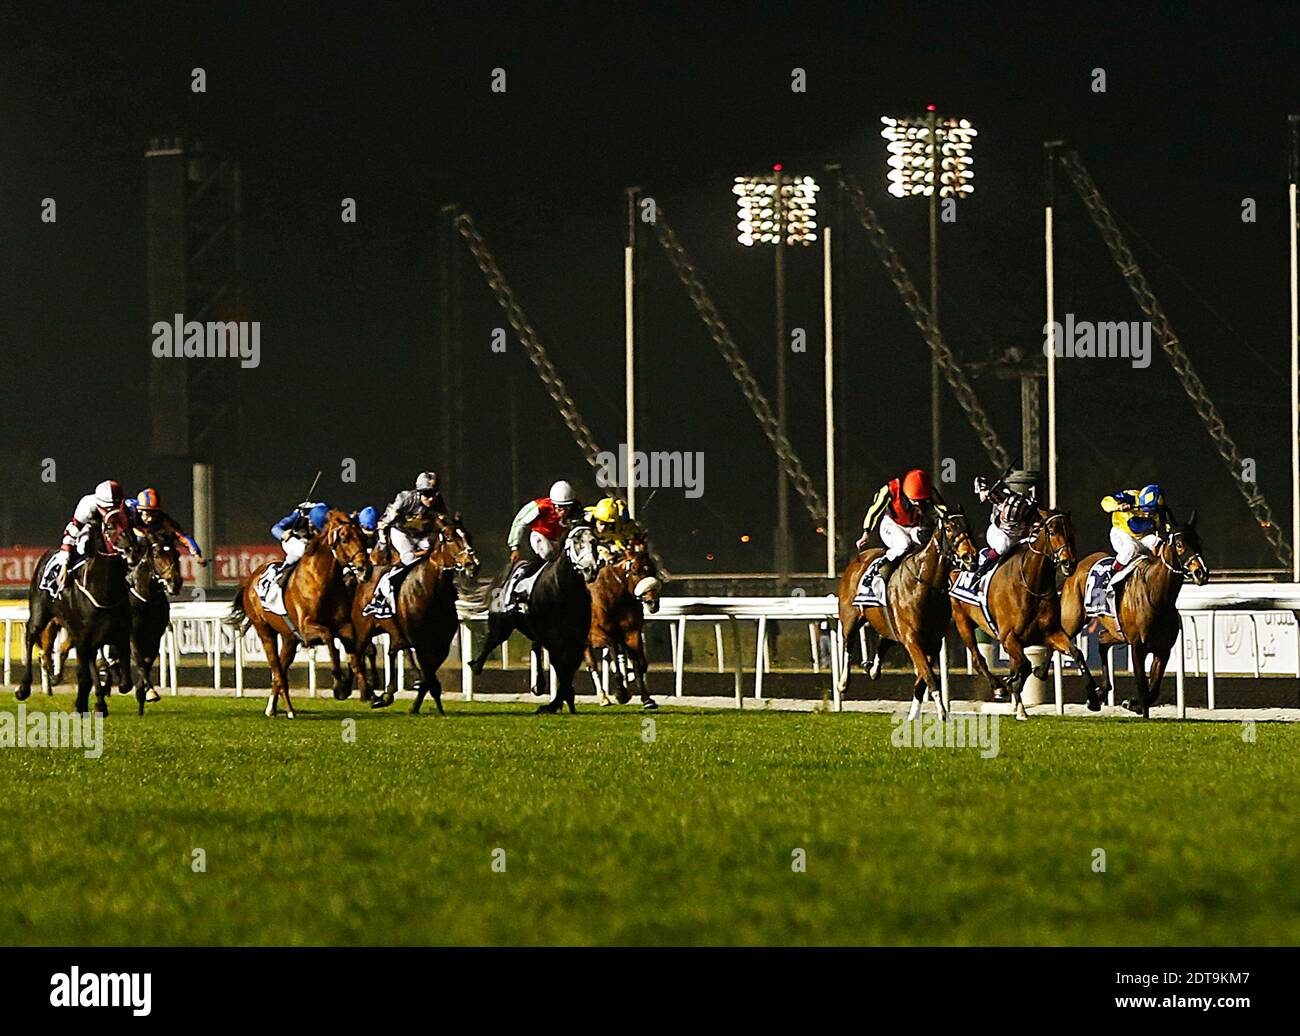 Jockeys compete in the Dubai Sheema Classic race held on Dubai World Cup day on March 29, 2013 at Meydan racecourse in Dubai, United Arab Emirates. A cosmopolitan gathering of horses from seven different countries contest the US$10 million Emirates Dubai World Cup at Meydan racecourse. Photo by Khaled Salem/ABACAPRESS.COM Stock Photo